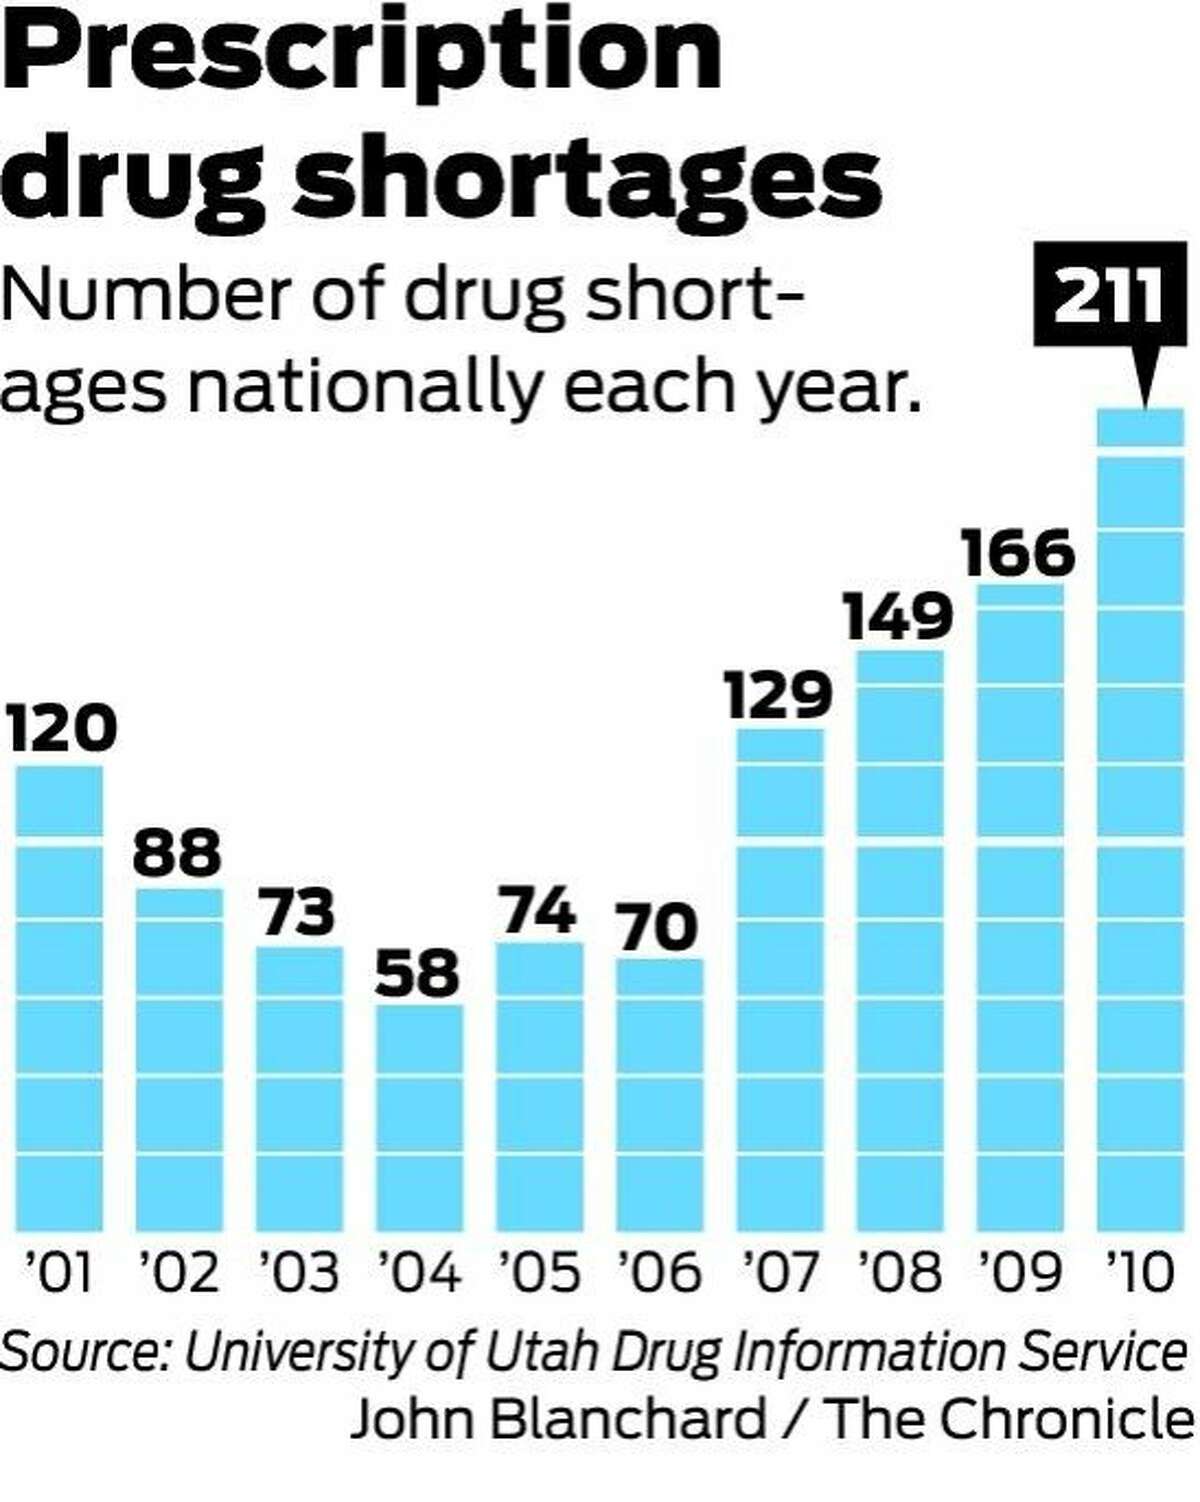 Critical drugs in short supply